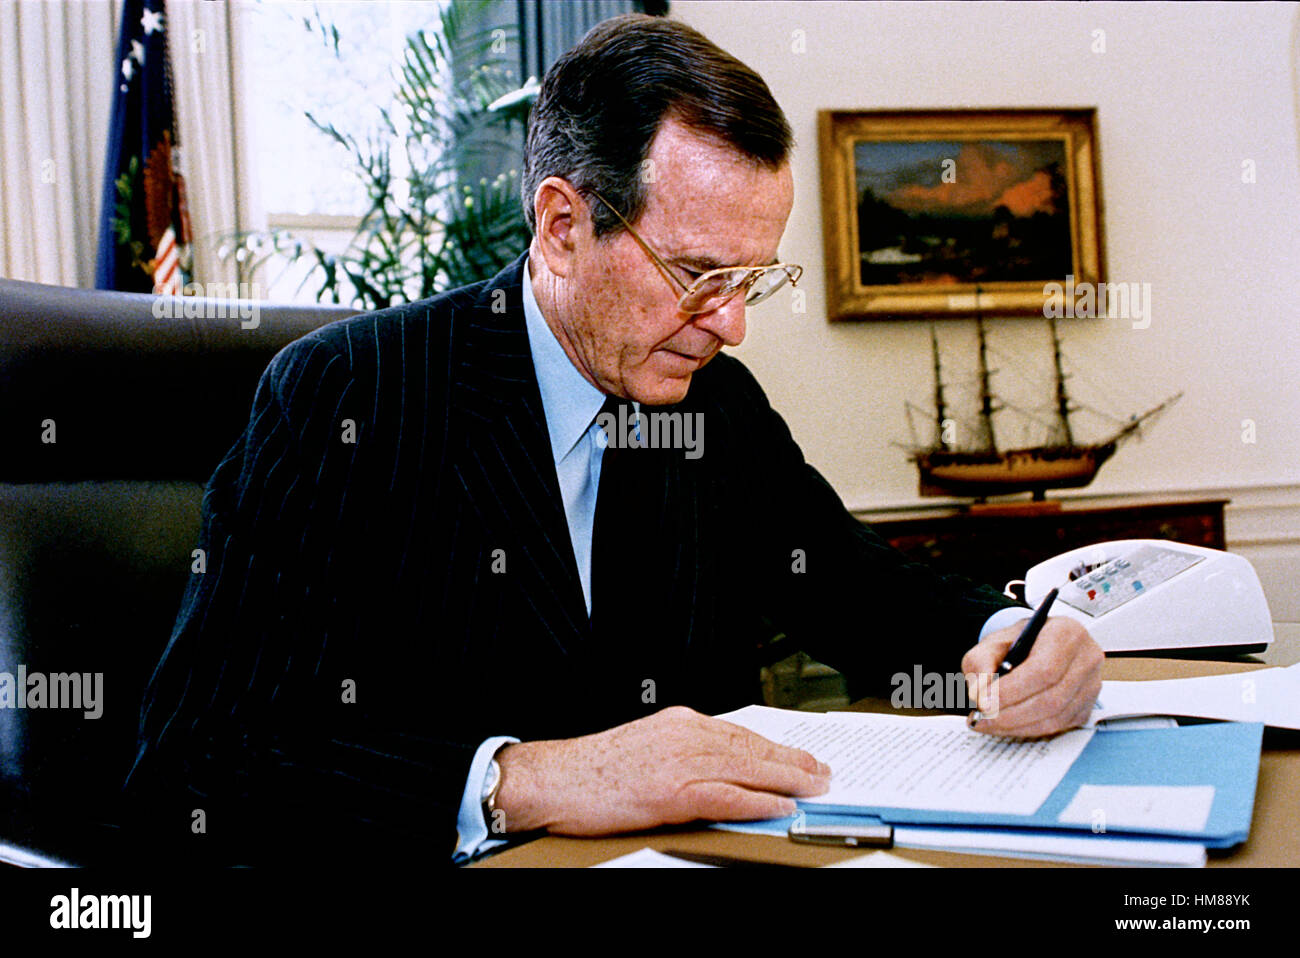 Washington, D.C. - January 24, 1992 -- United States President George H.W. Bush works on his State of the Union Address at his desk in the Oval Office in the White House in Washington, D.C. on January 24, 1992..Credit: David Valdez - White House via CNP / Stock Photo